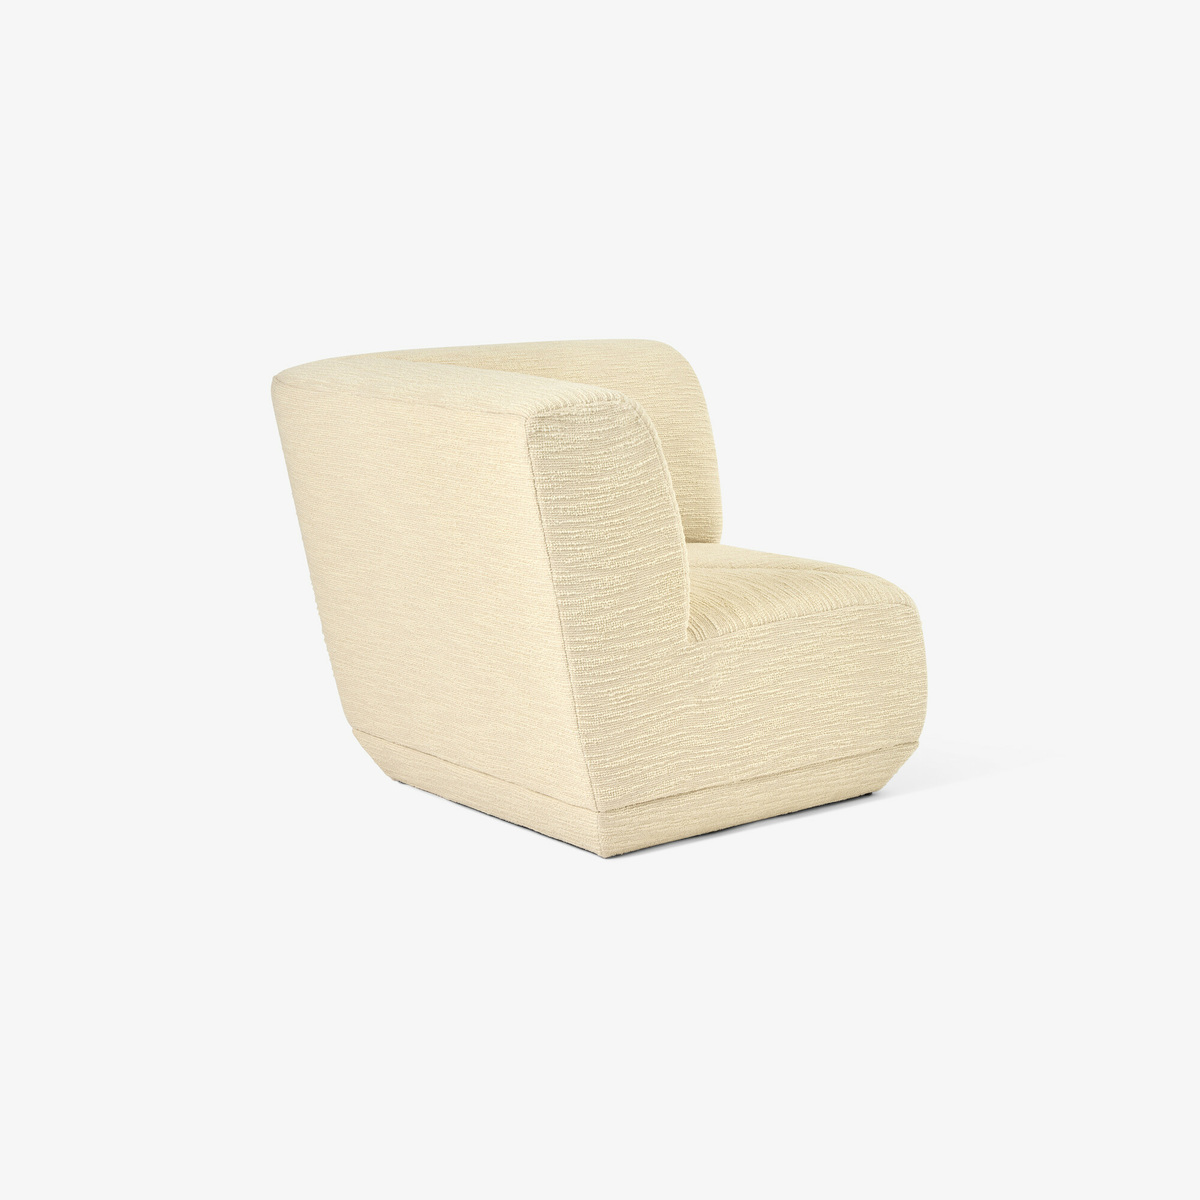 Chill Corner Armchair, Off-White - Curl fabric - image 3